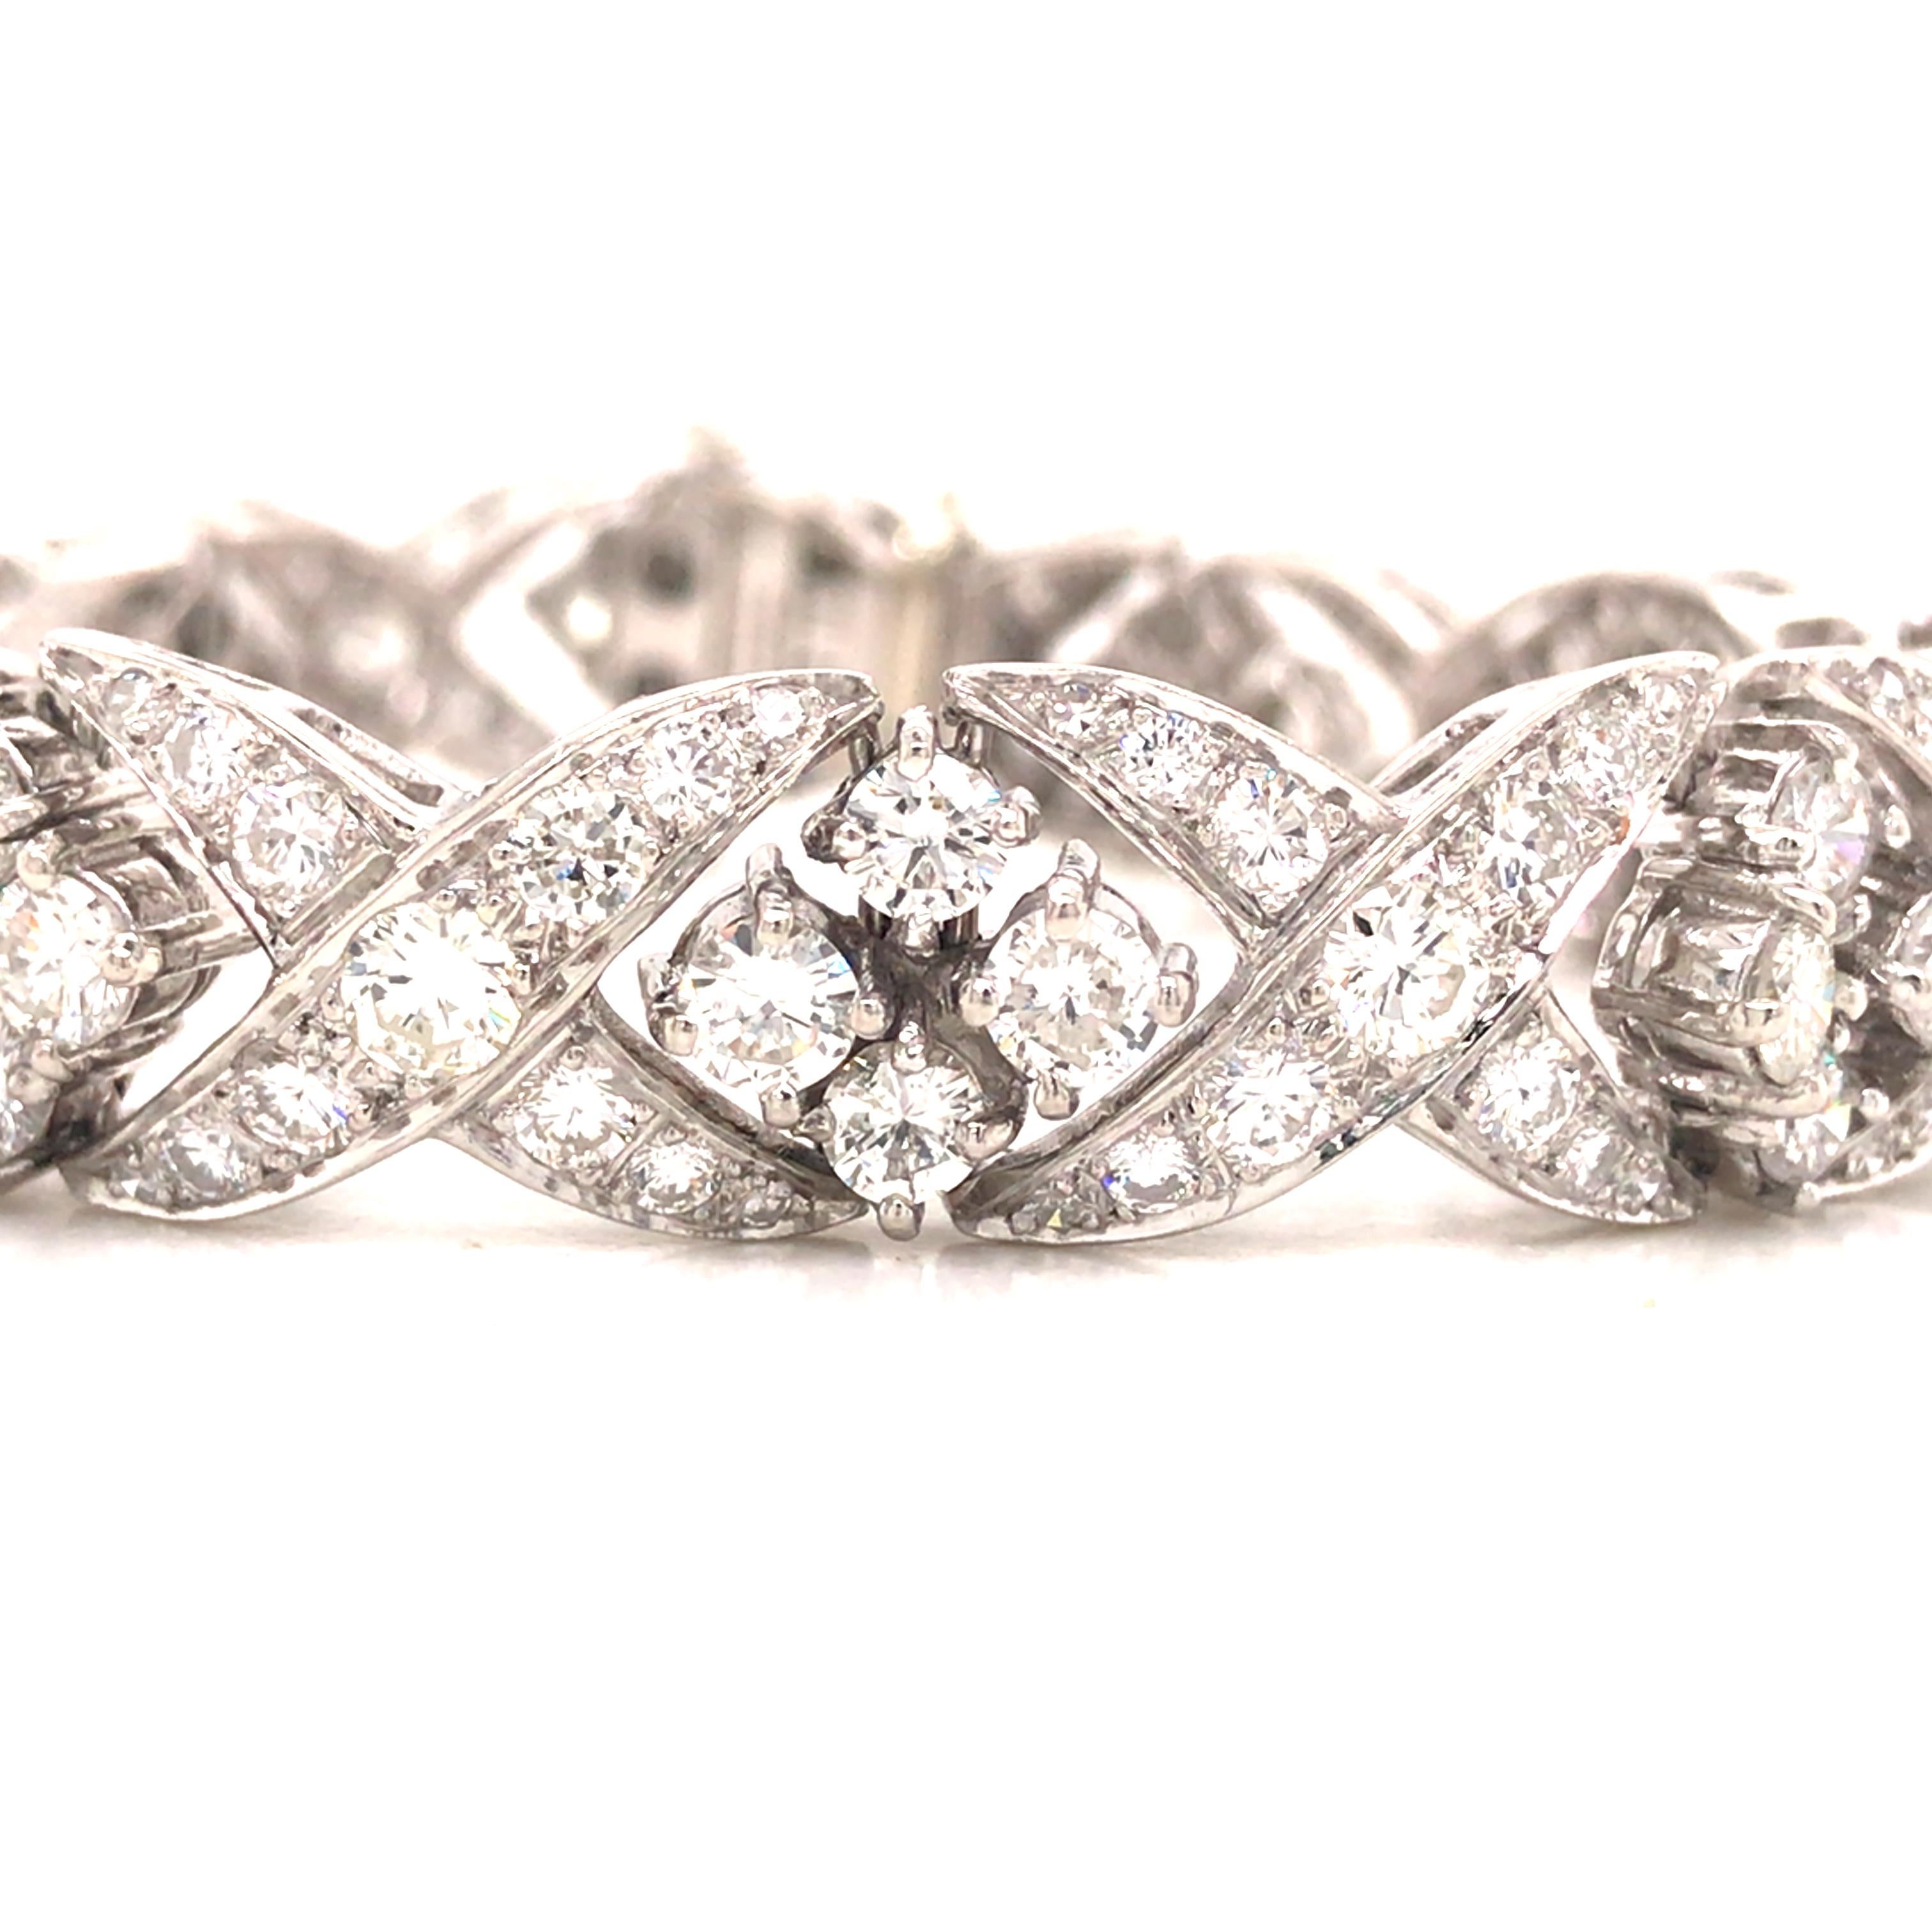 Diamond 'X' 'O' Bracelet in Platinum and Palladium.  Round Brilliant Cut Diamonds weighing 12.30 carat total weight, F-G in color and VS-SI in clarity are expertly set.  The Bracelet measures 7 inch in length and 1/2 inch in width. 39.65 grams.